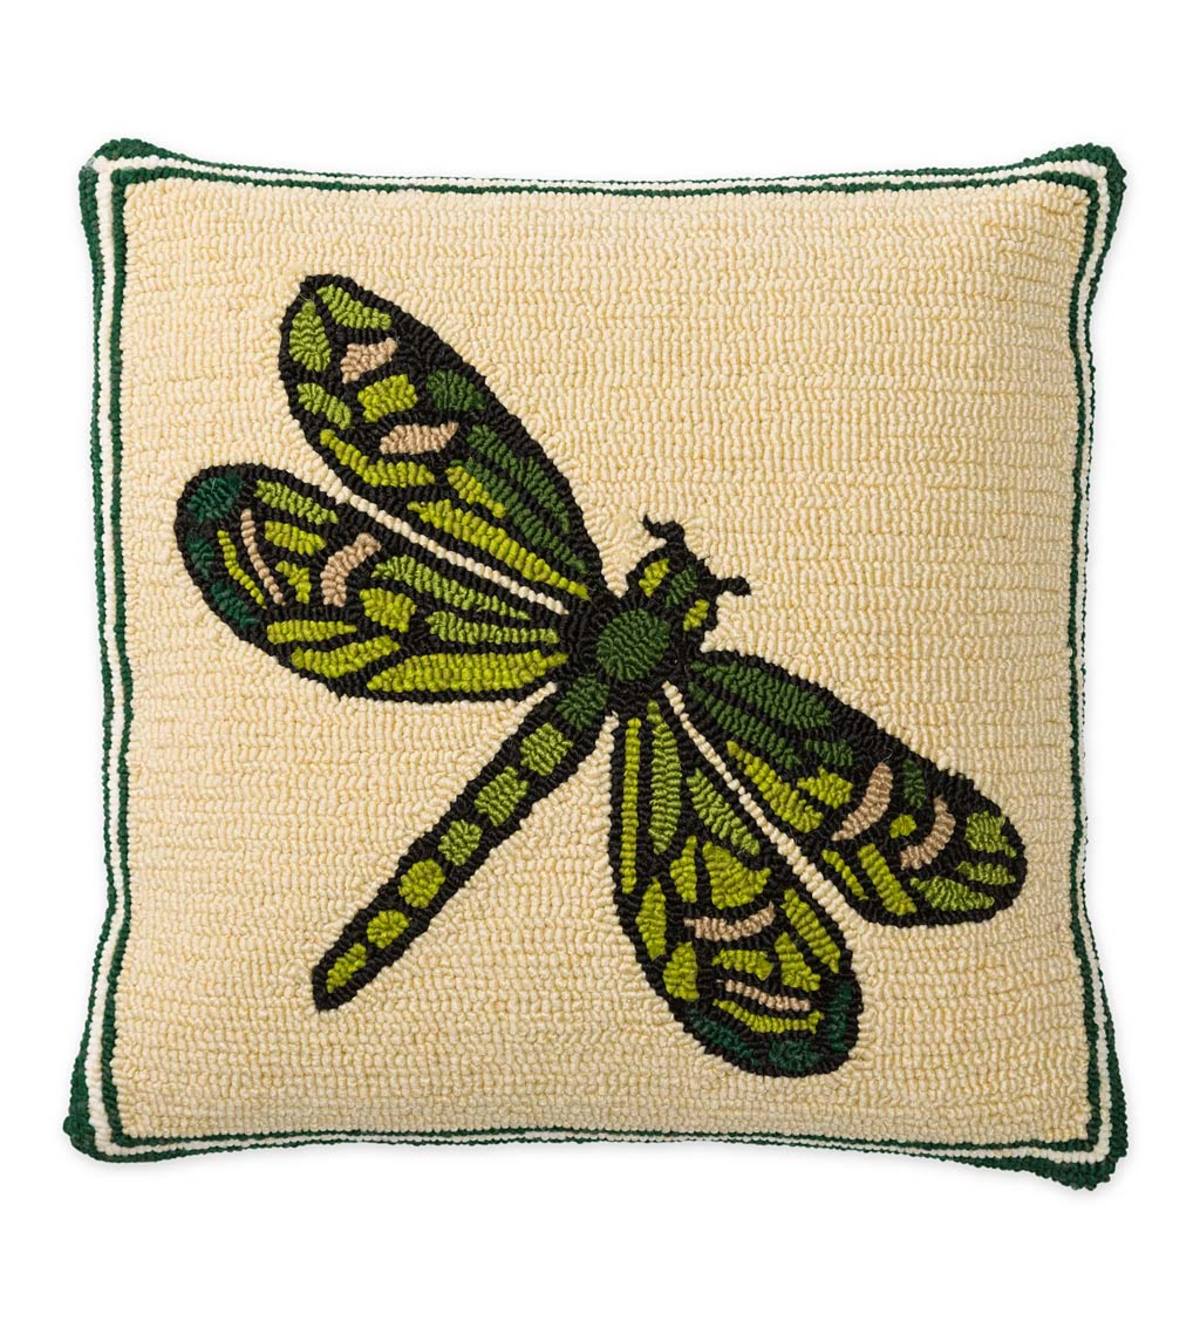 Dragonfly Latch Hook Pillow Kit Hooked Cushion for Adult, Beginners and Kid